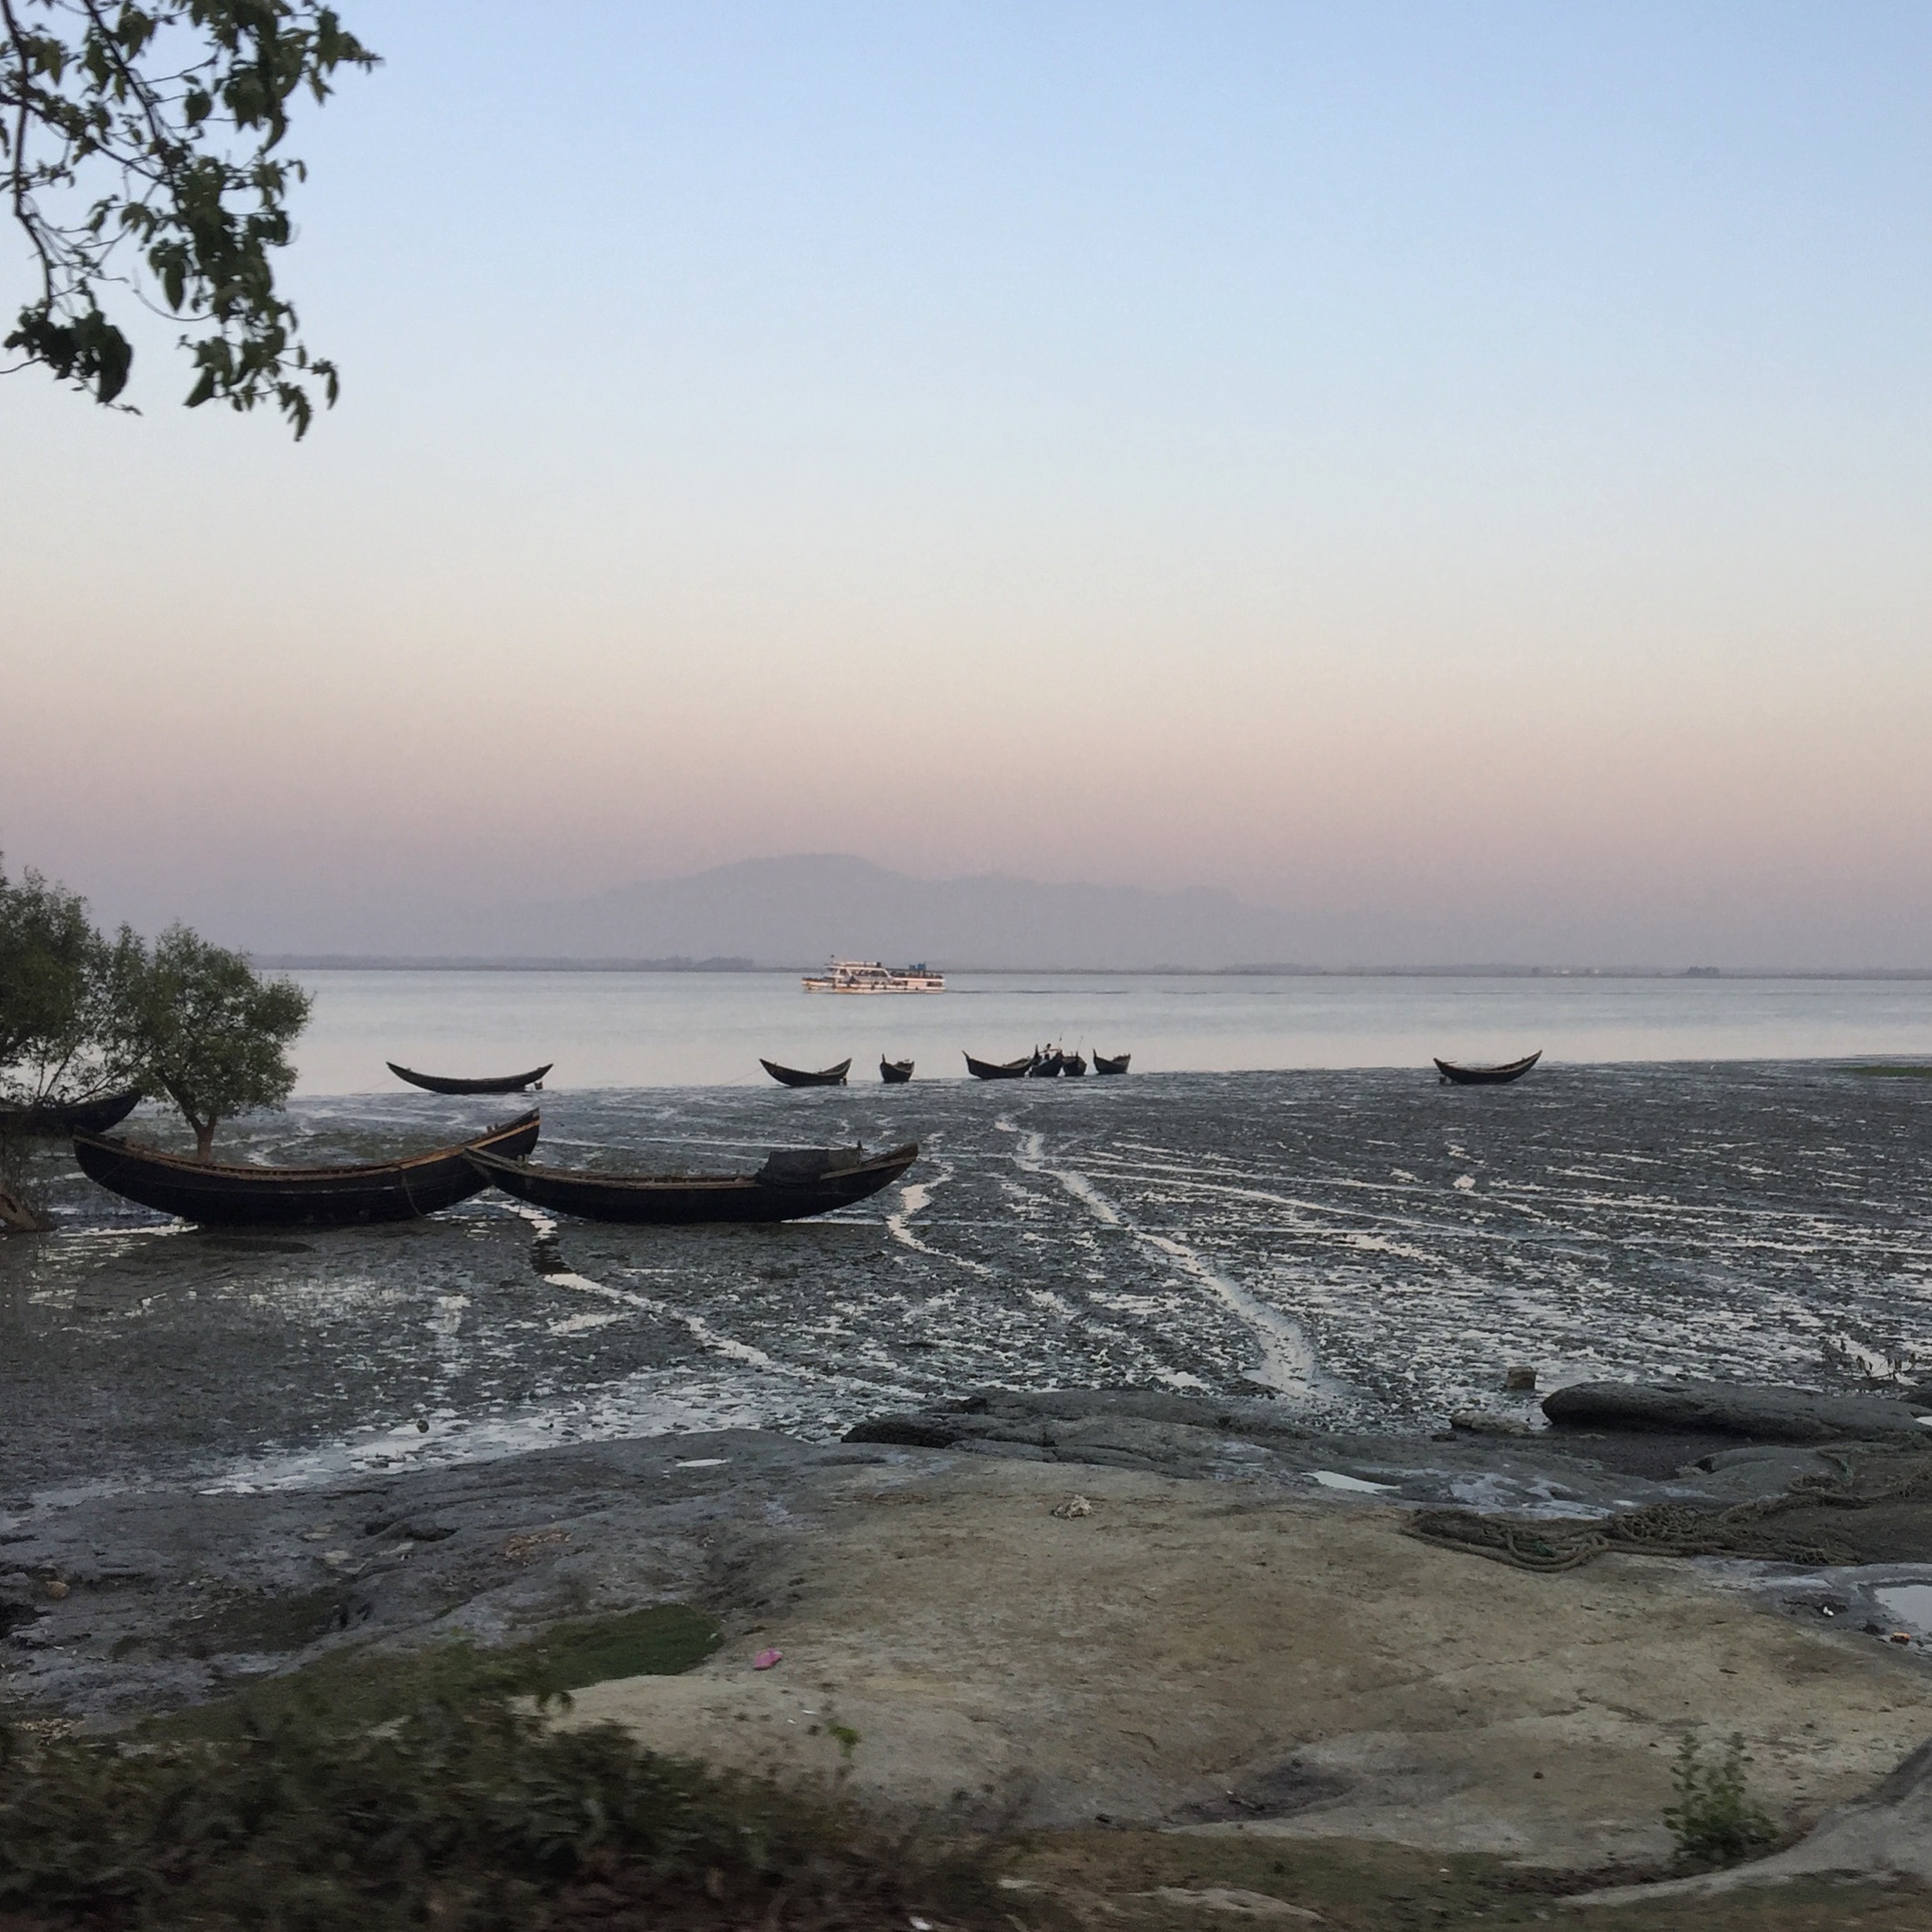  TEKNAF | The faint outlines of Myanmar seen from the Naf River in Teknaf, which marks the official border. Thousands of Rohingya have paid boat smugglers to take them the short distance across. Bangladesh border police typically intercept 4000-5000 